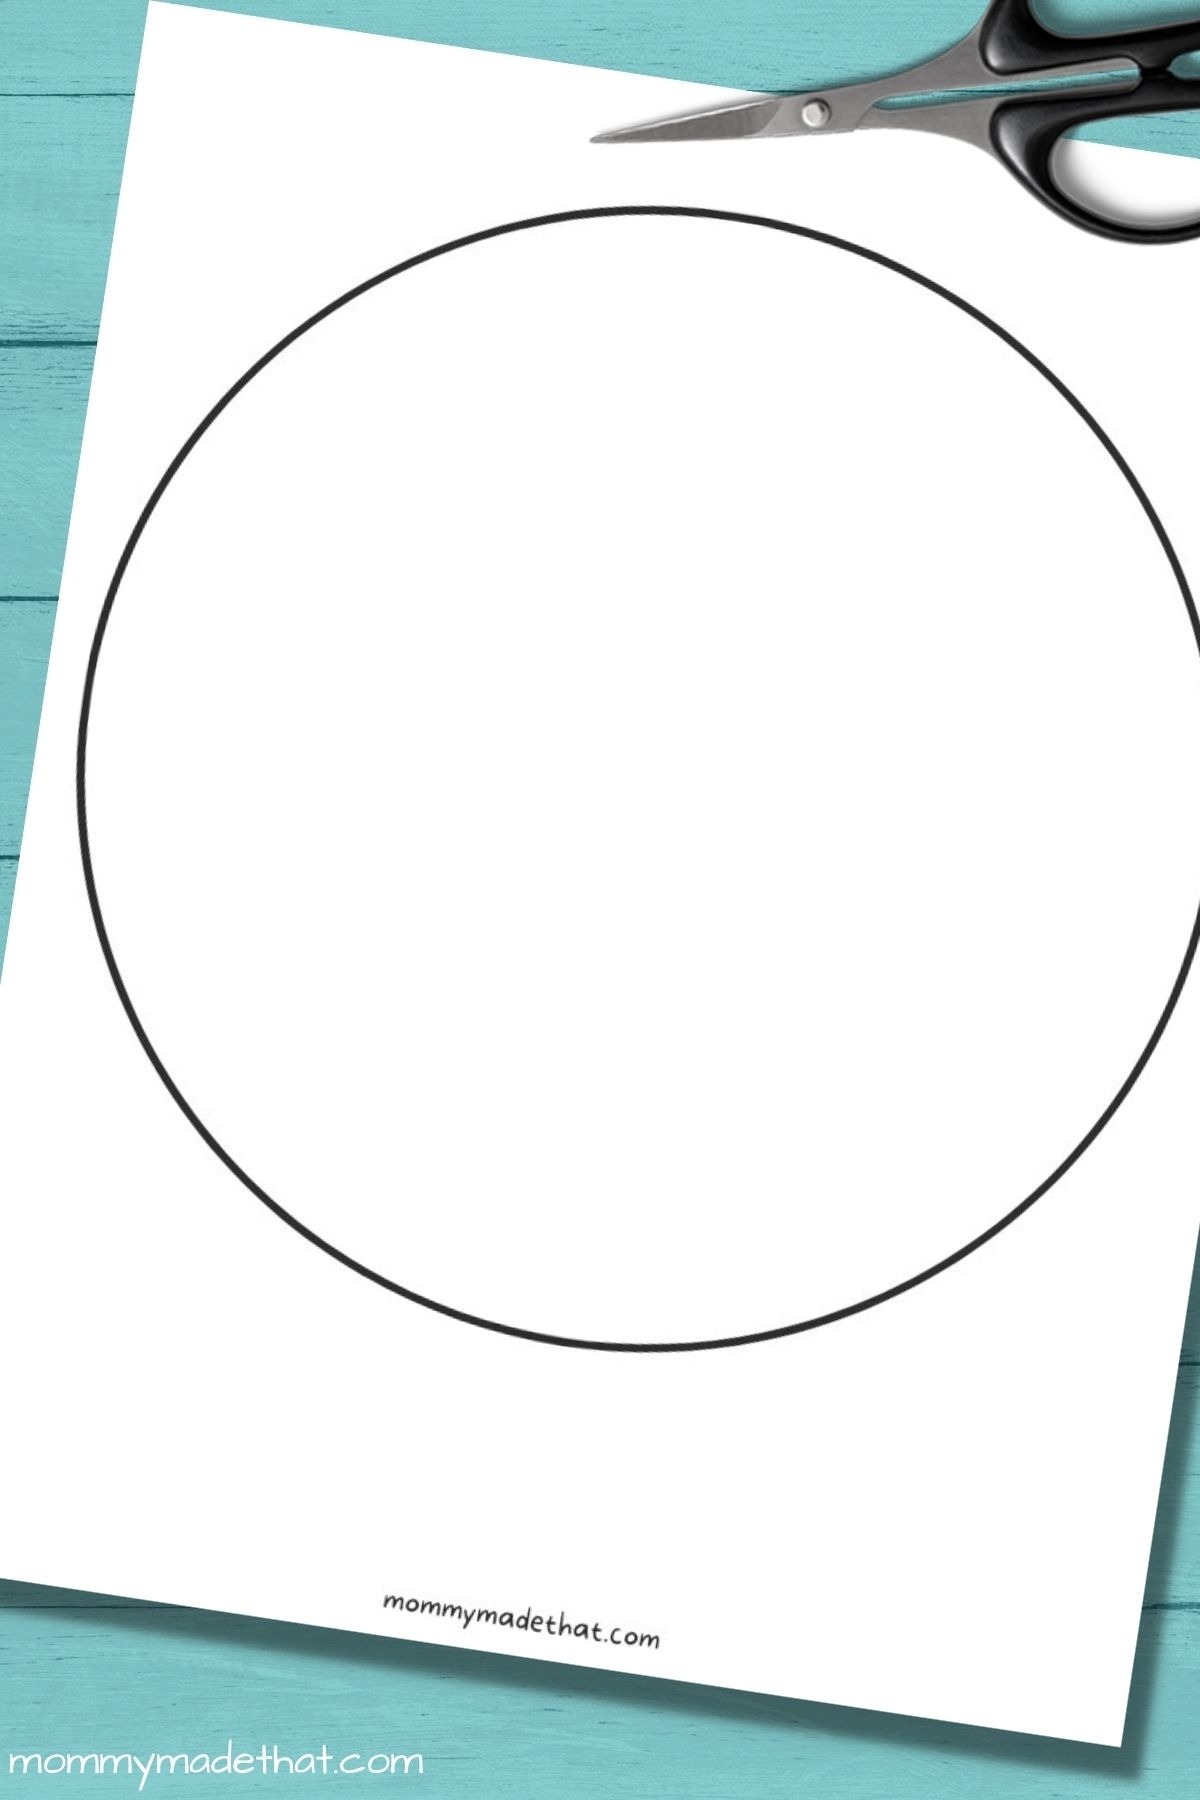 Free Printable Circle Templates In All Sorts Of Sizes - Free Printable 6 Inch Circle Template